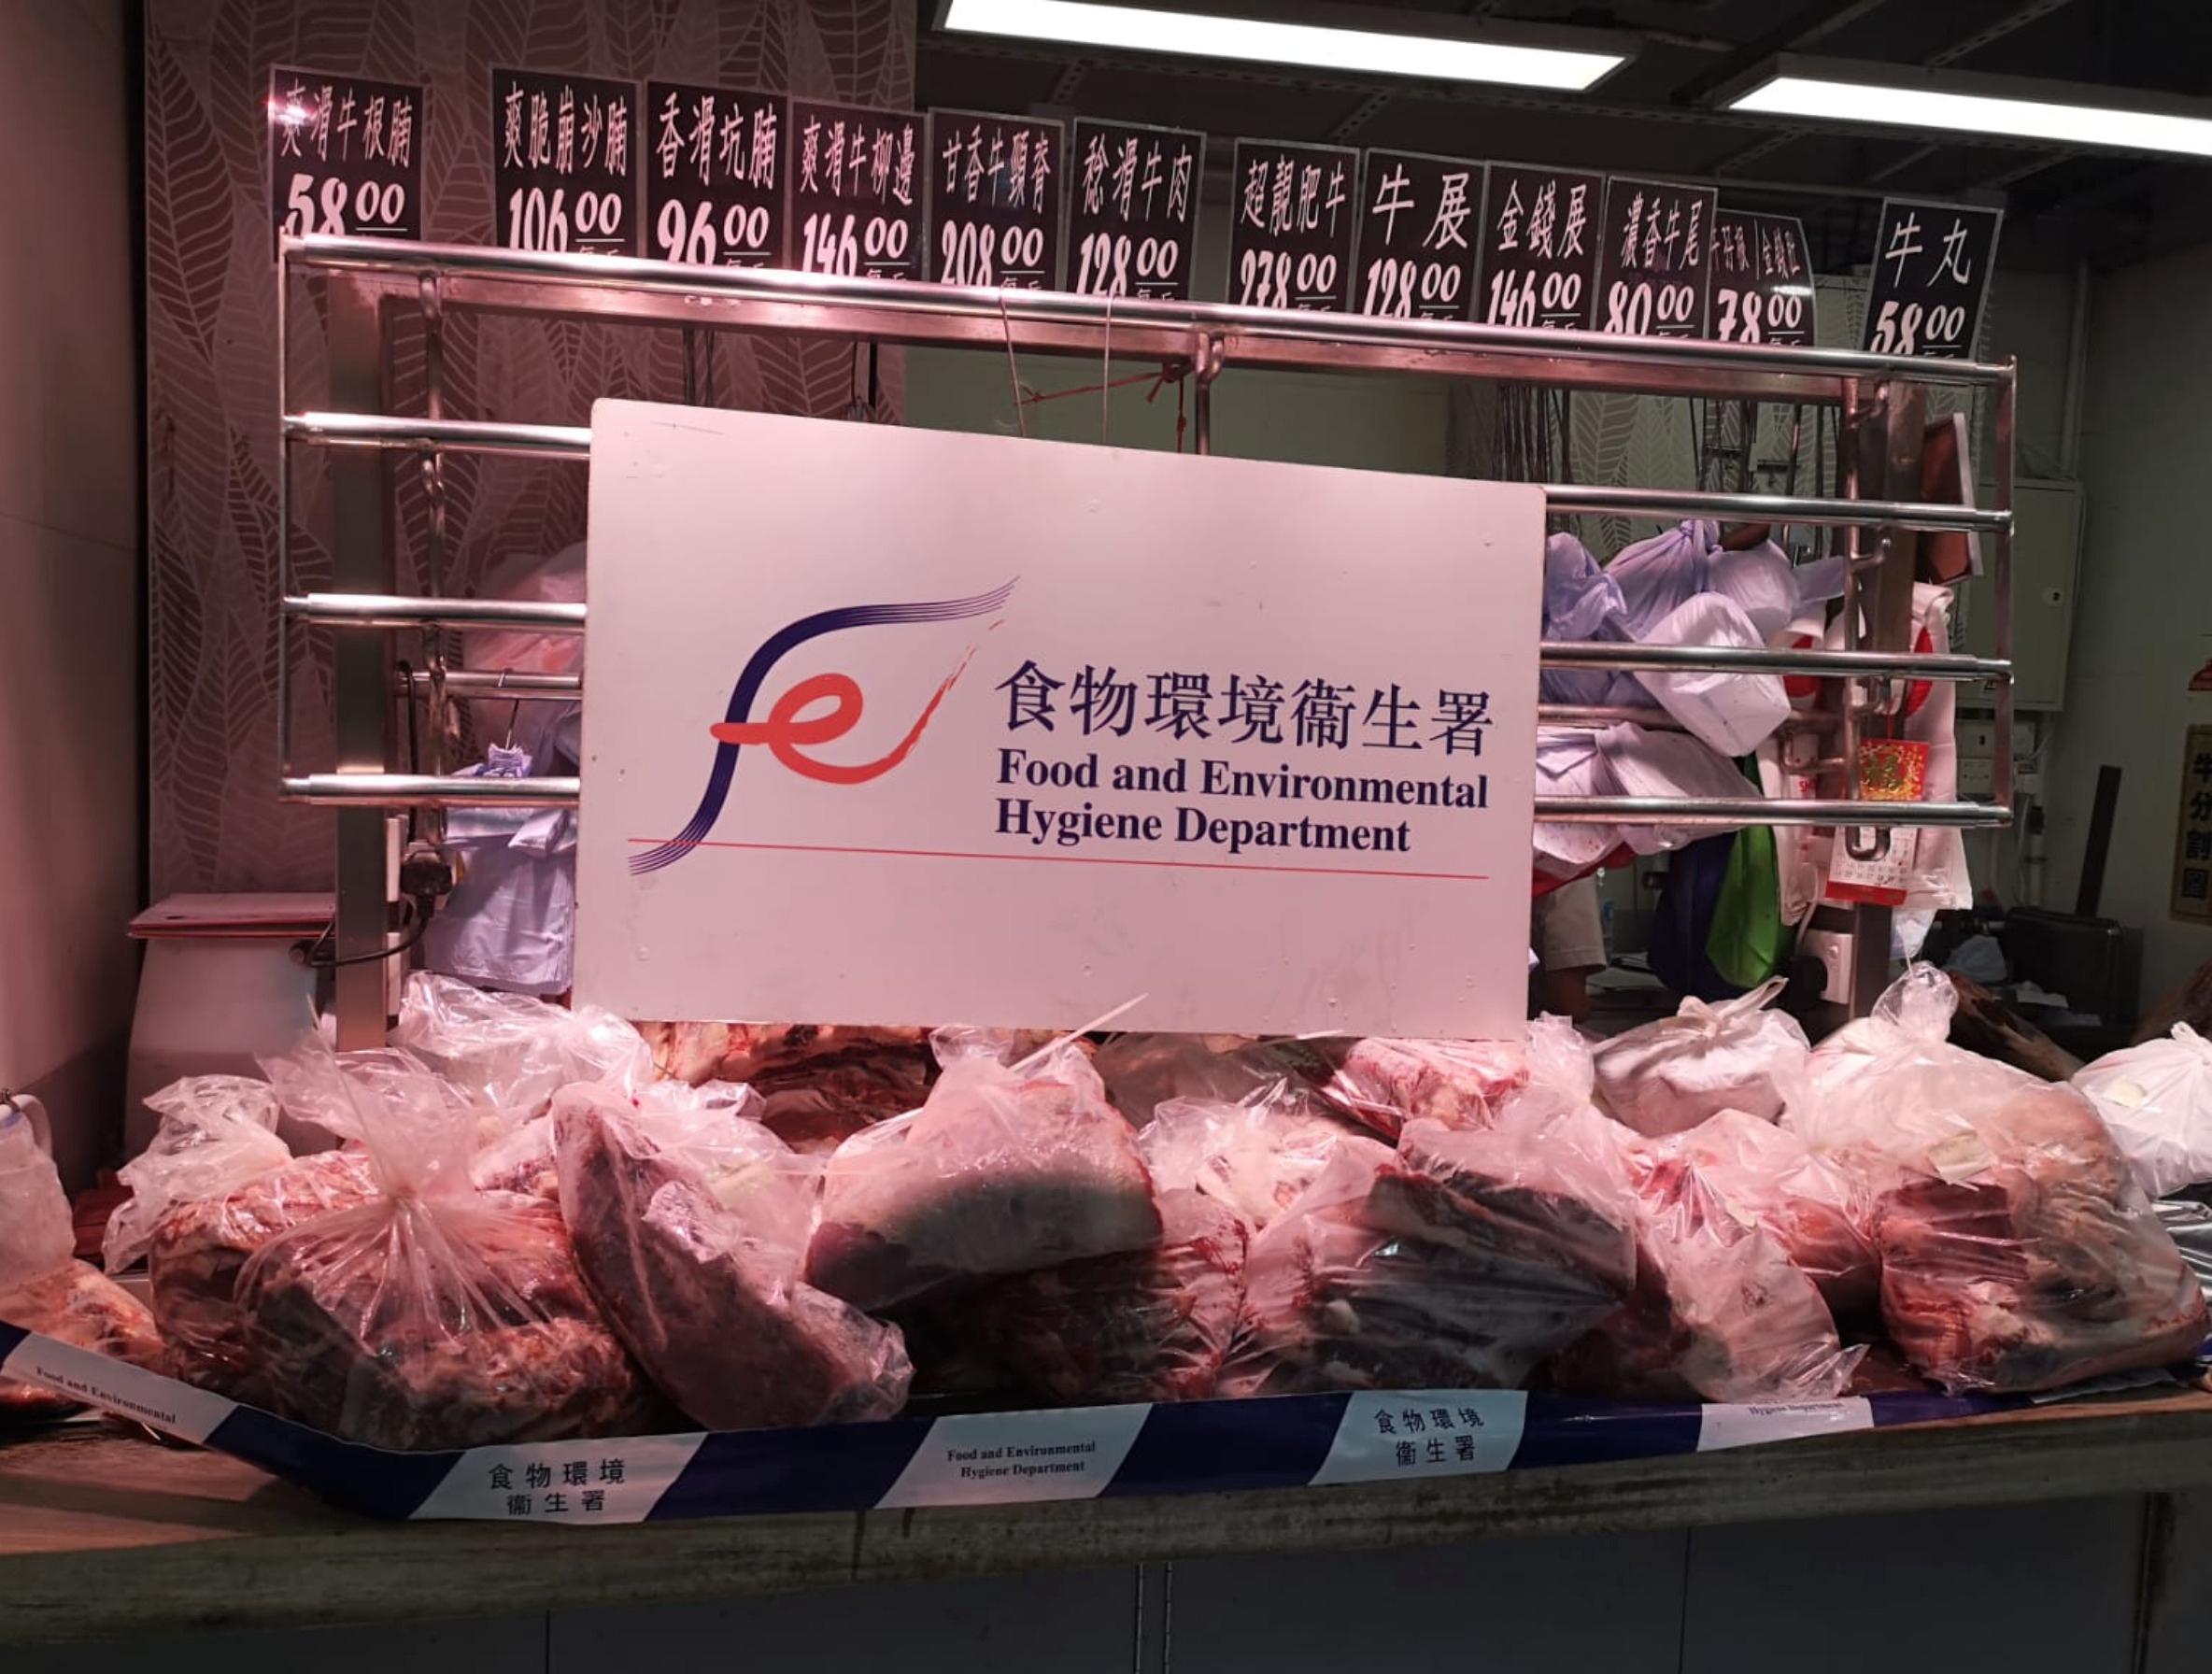 The Food and Environmental Hygiene Department (FEHD) in a blitz operation today (May 5) raided a licensed fresh provision shop in Freshall (Sha Kok Market), Sha Tin, suspected of selling chilled meat or frozen meat as fresh meat. Photo shows the meat seized by FEHD officers during the operation.